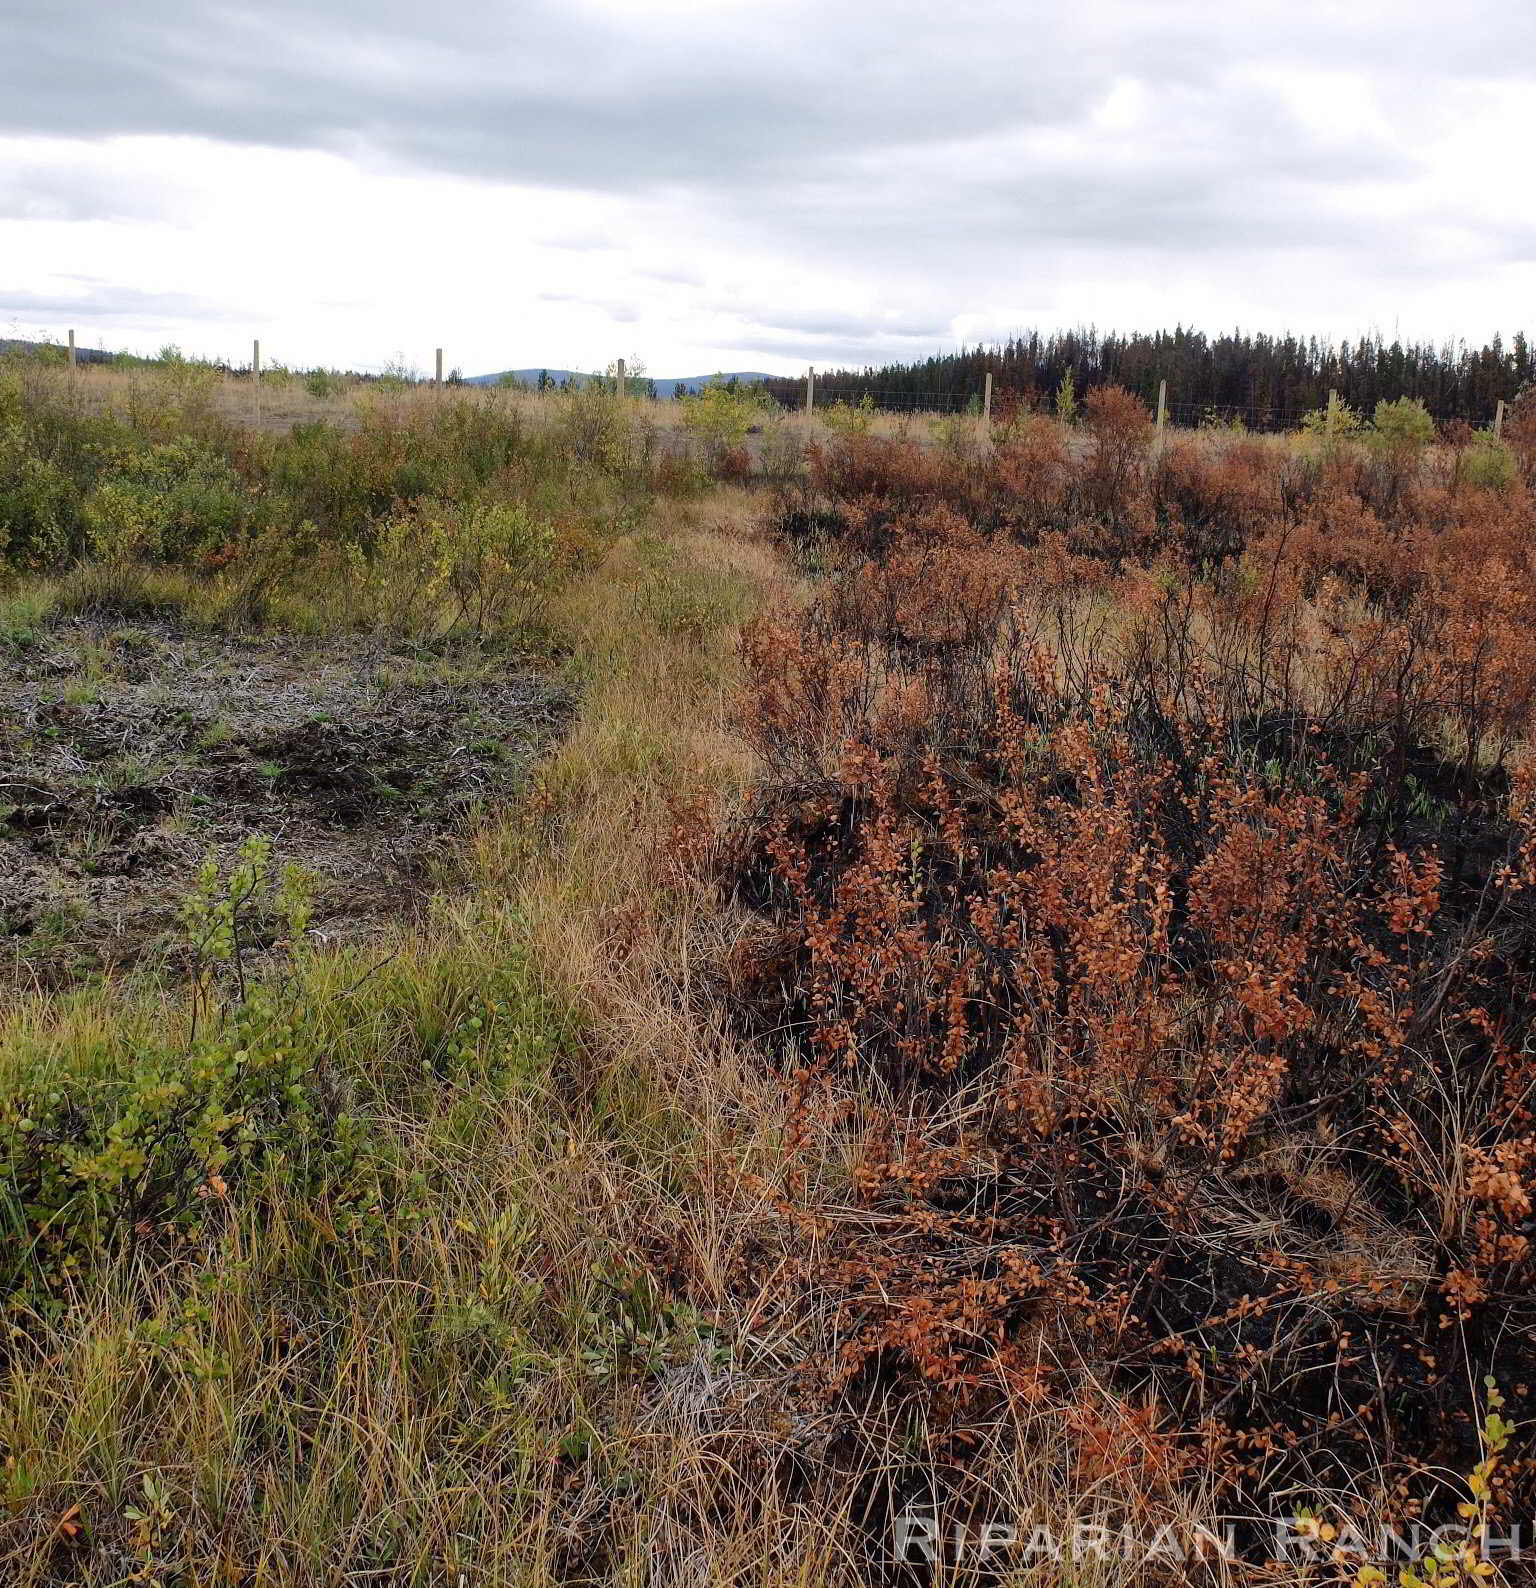 Rotationally grazed field with green plants on left and burned plants on right due to wildfires